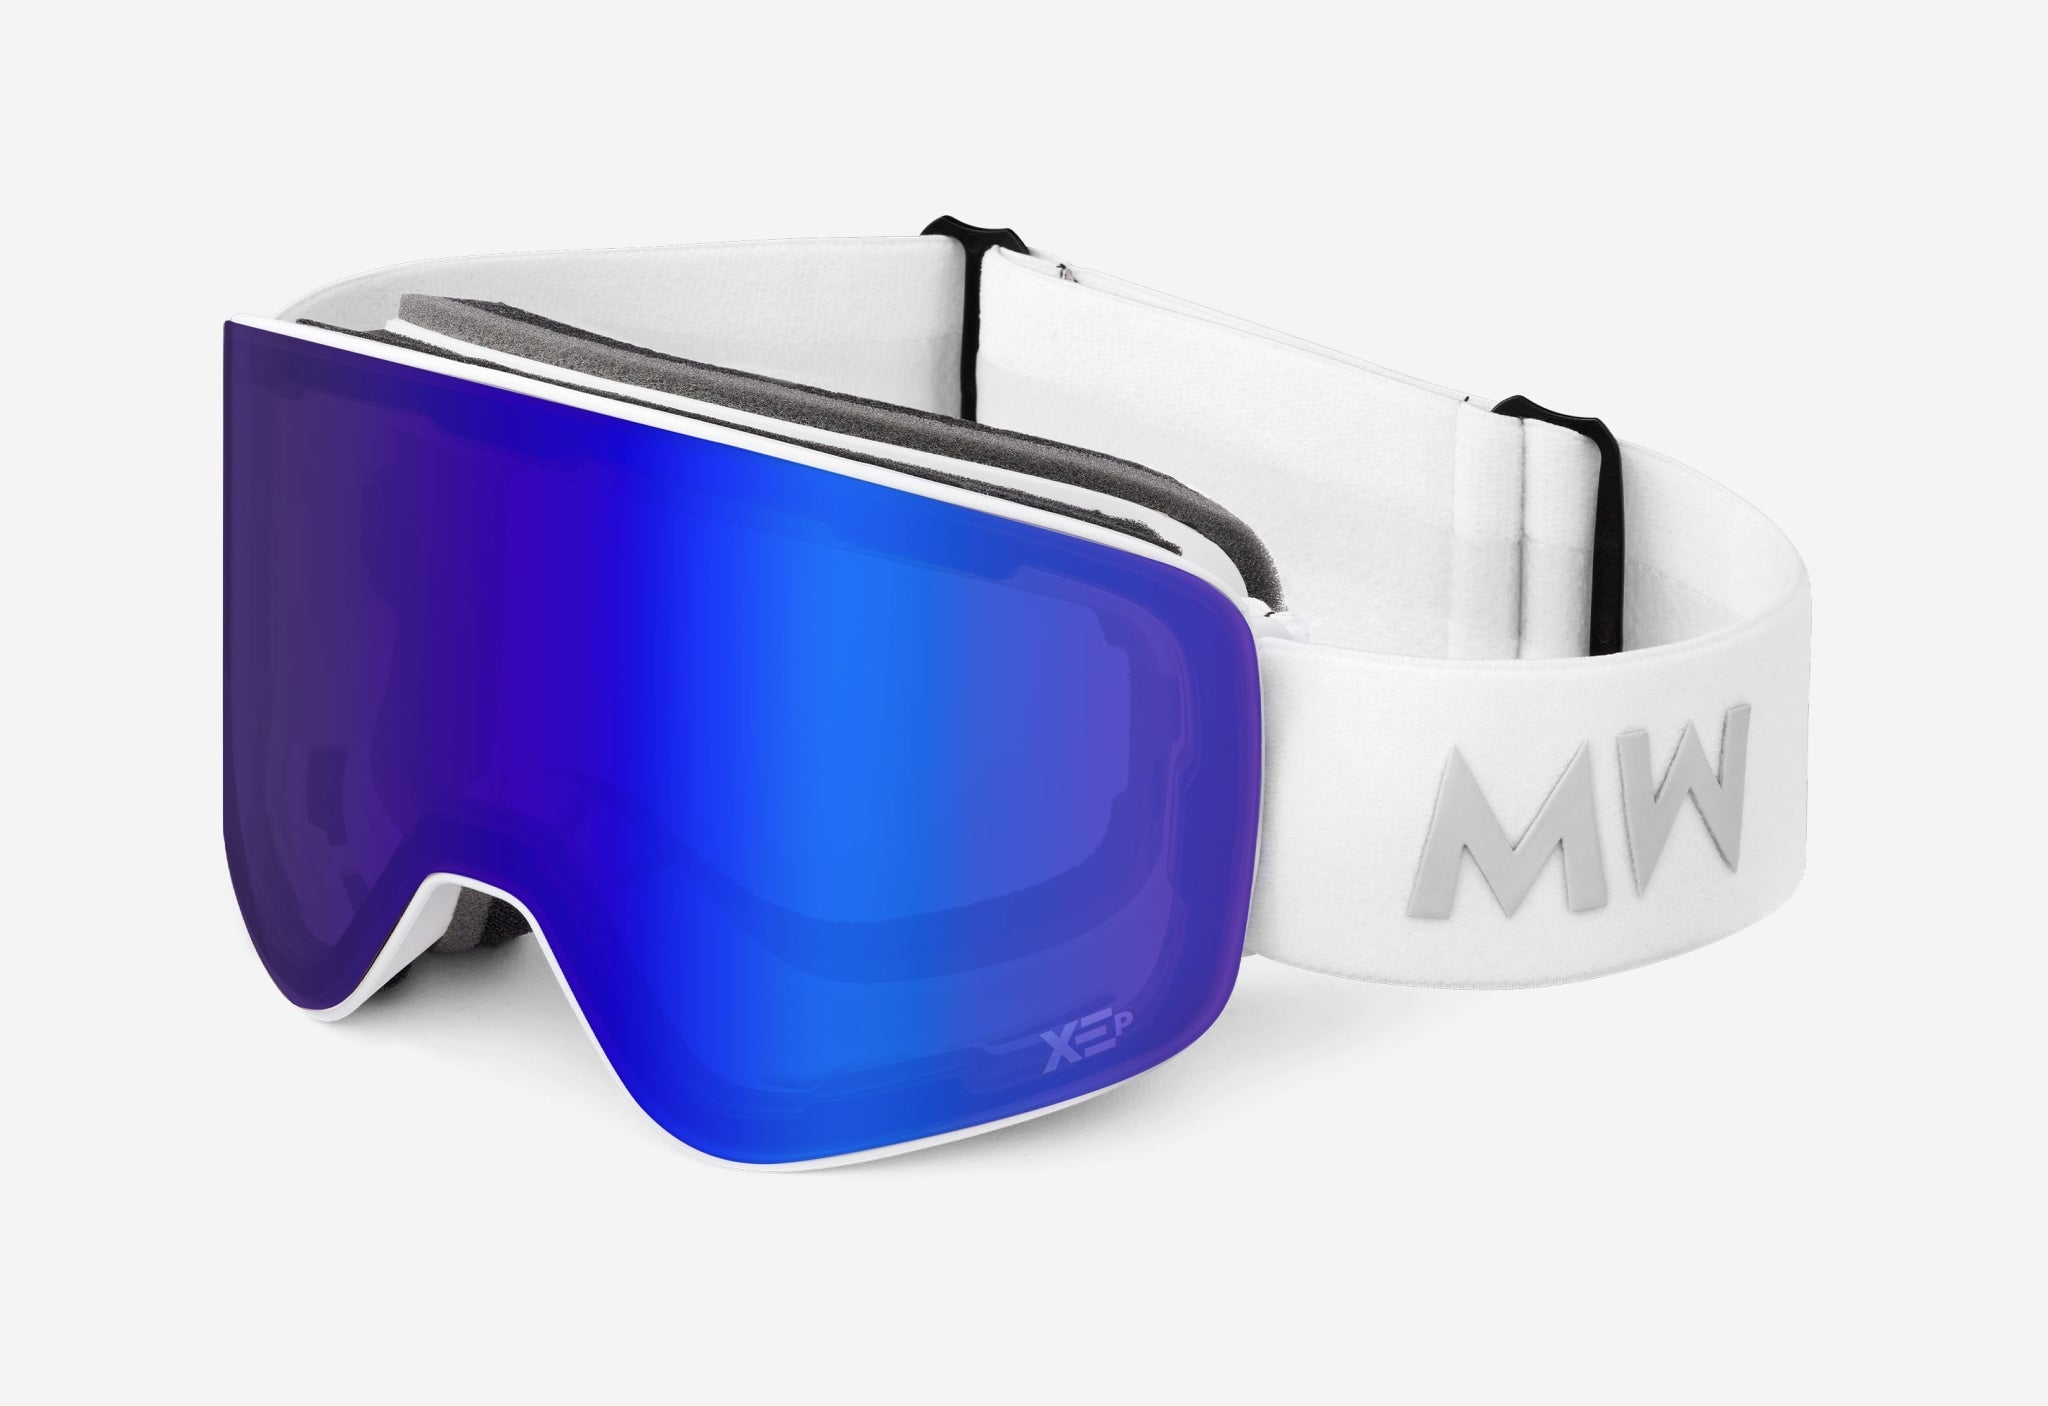 Snow and Ski Goggles quality blue lens. white | MessyWeekend